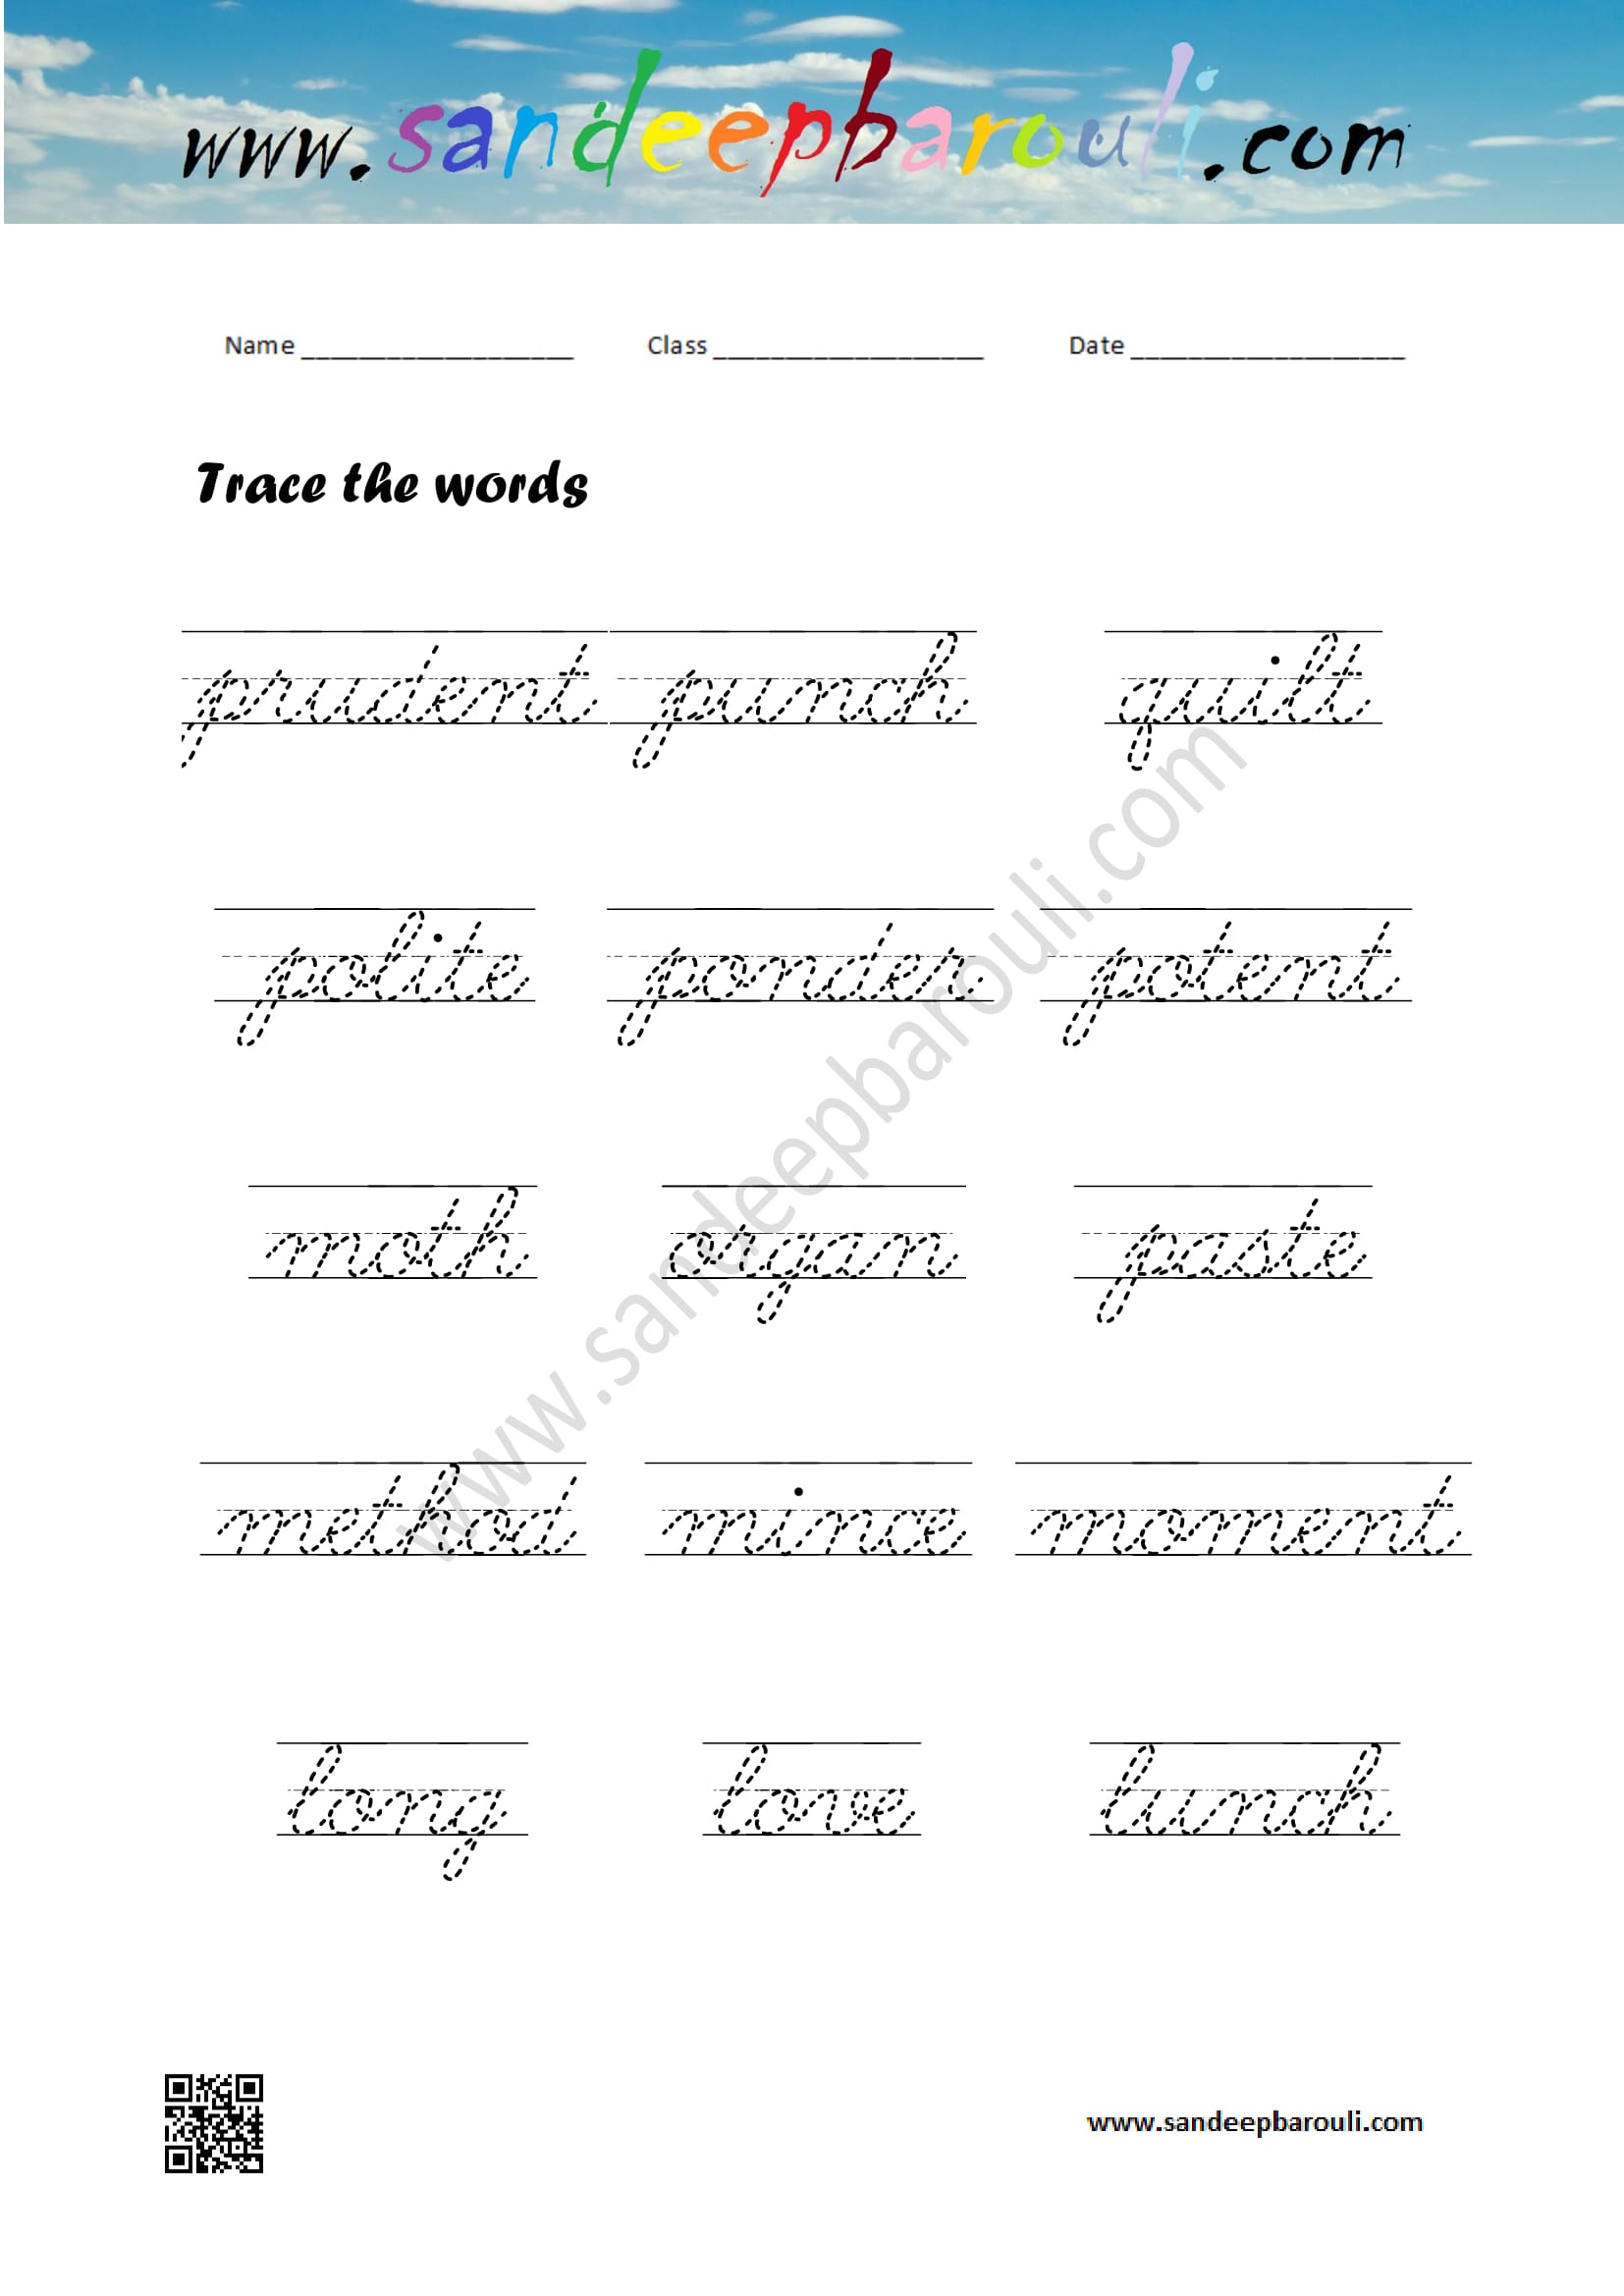 Cursive Writing Worksheet – Trace the words (56)